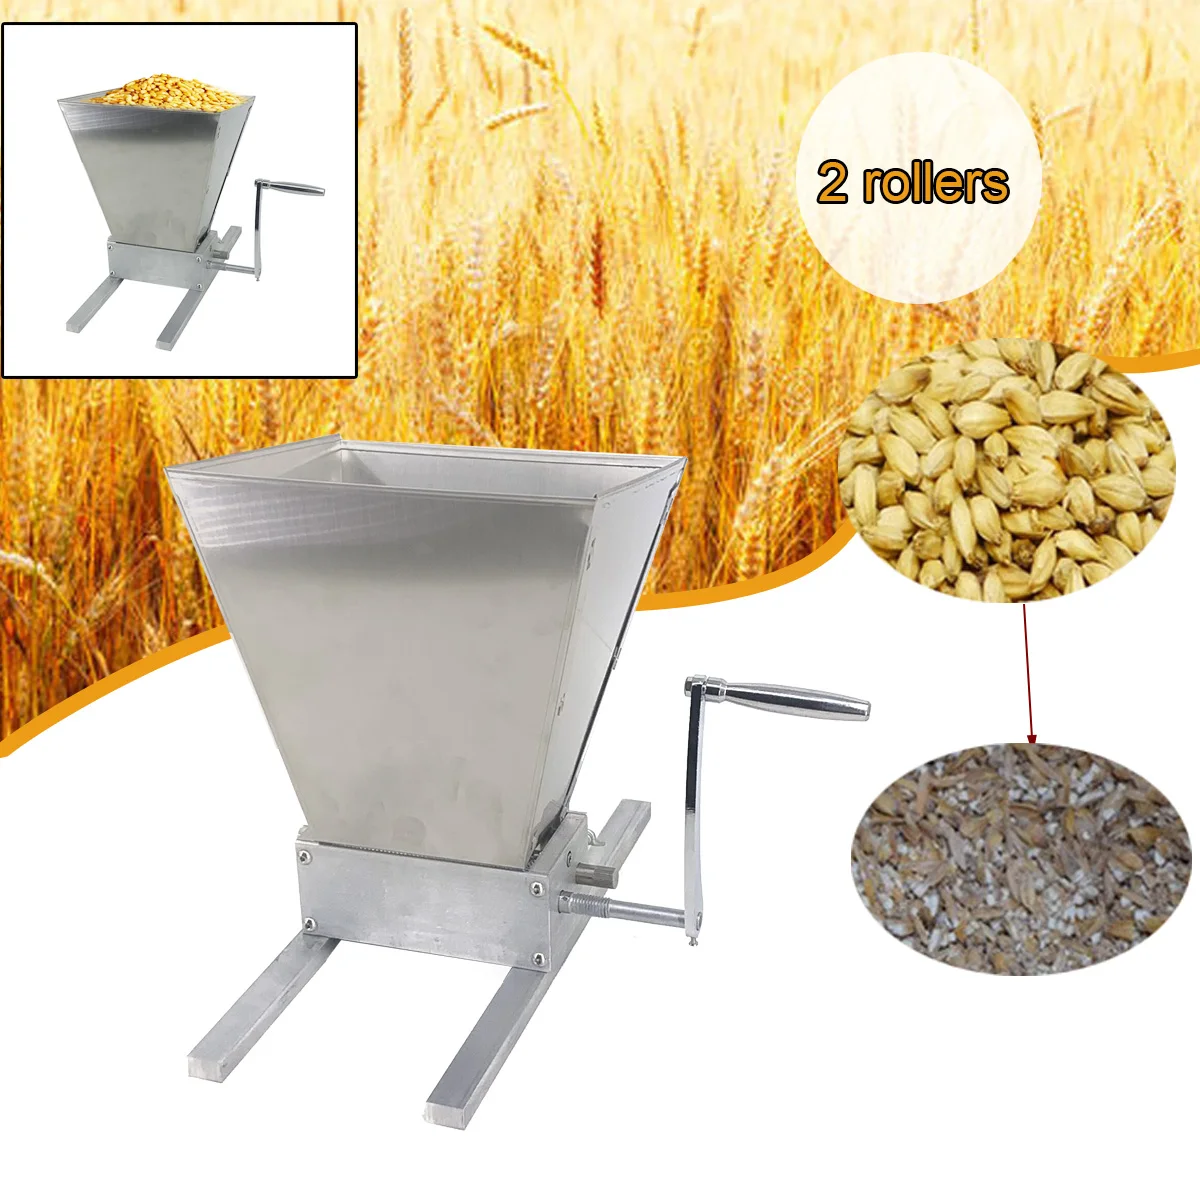 2 Rollers Grains Mill Grinder Food Processors Large Capacity Manual Stainless Steel Malt Corn Grain Crusher Double Roller